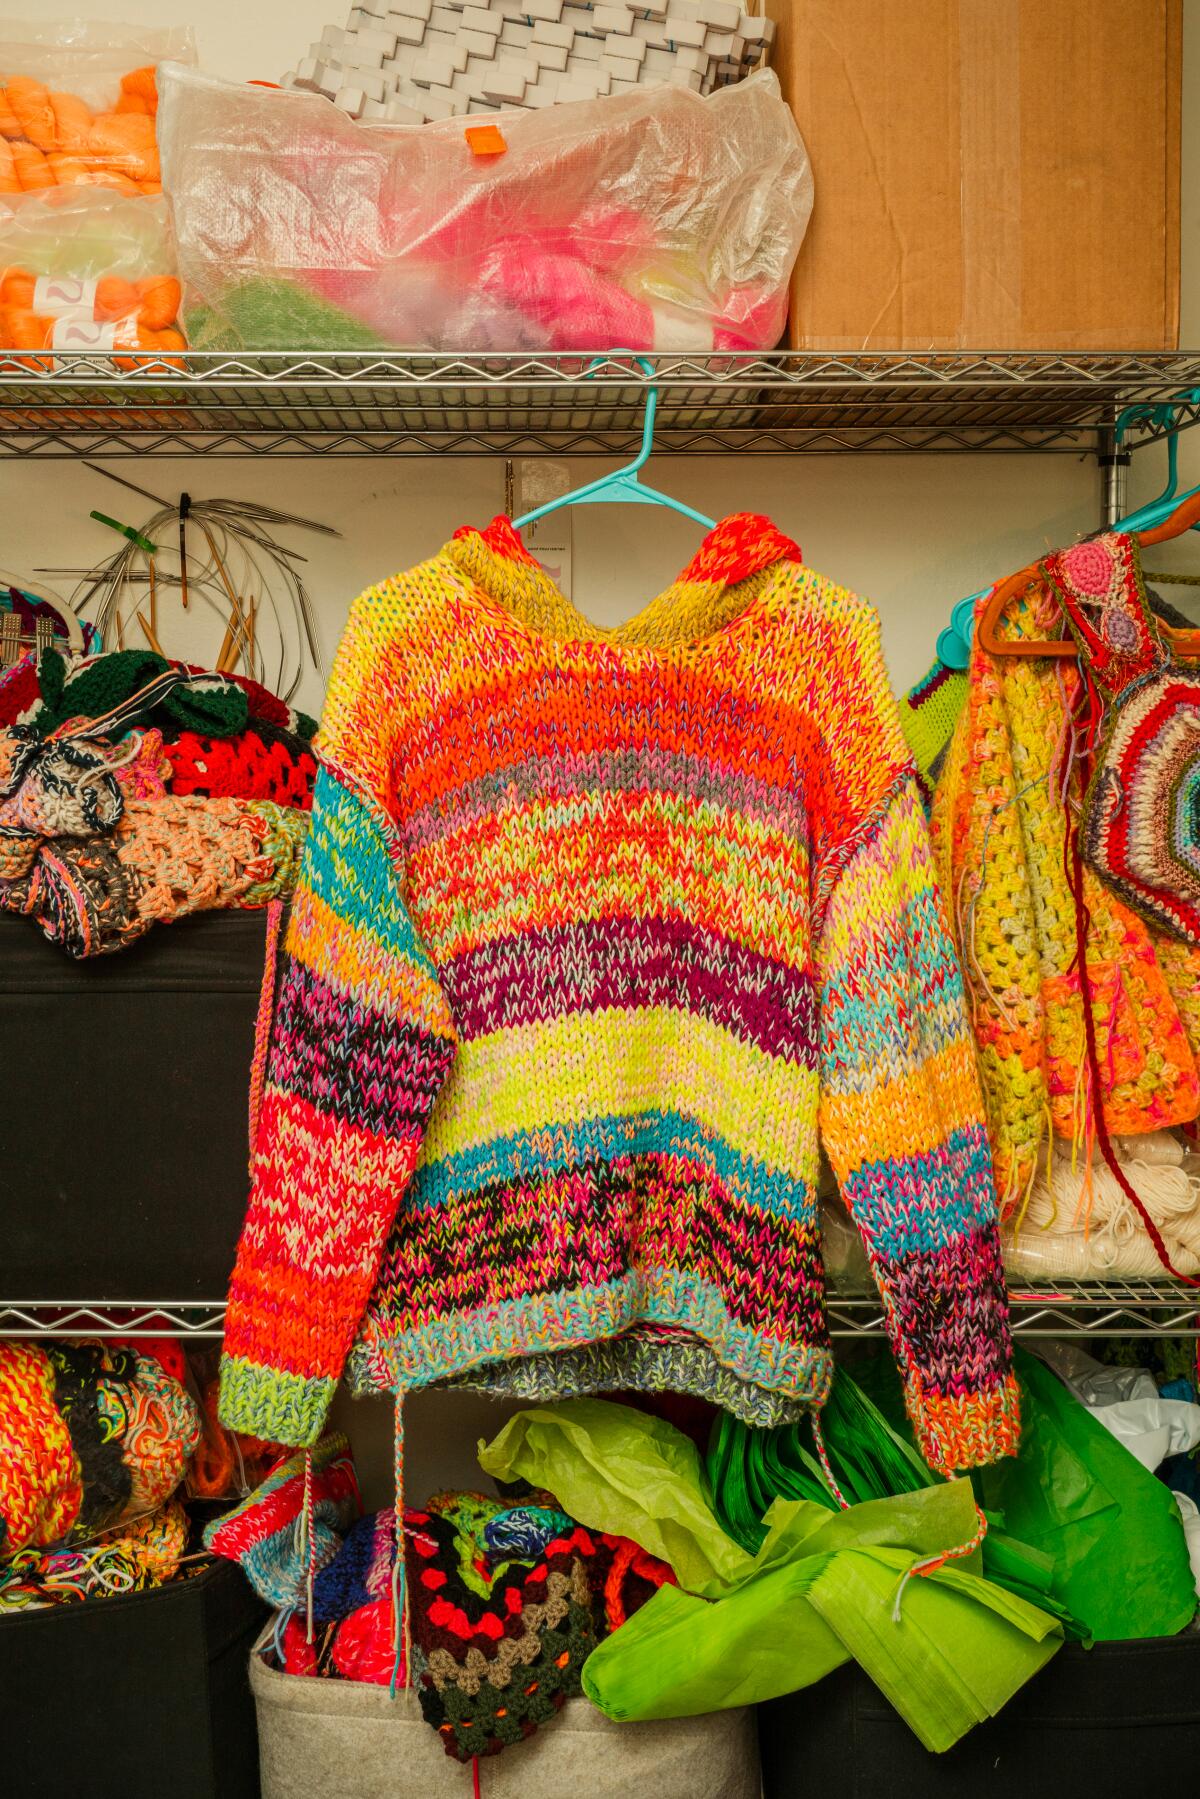 A crocheted sweater from Unlikely Fox's collection.